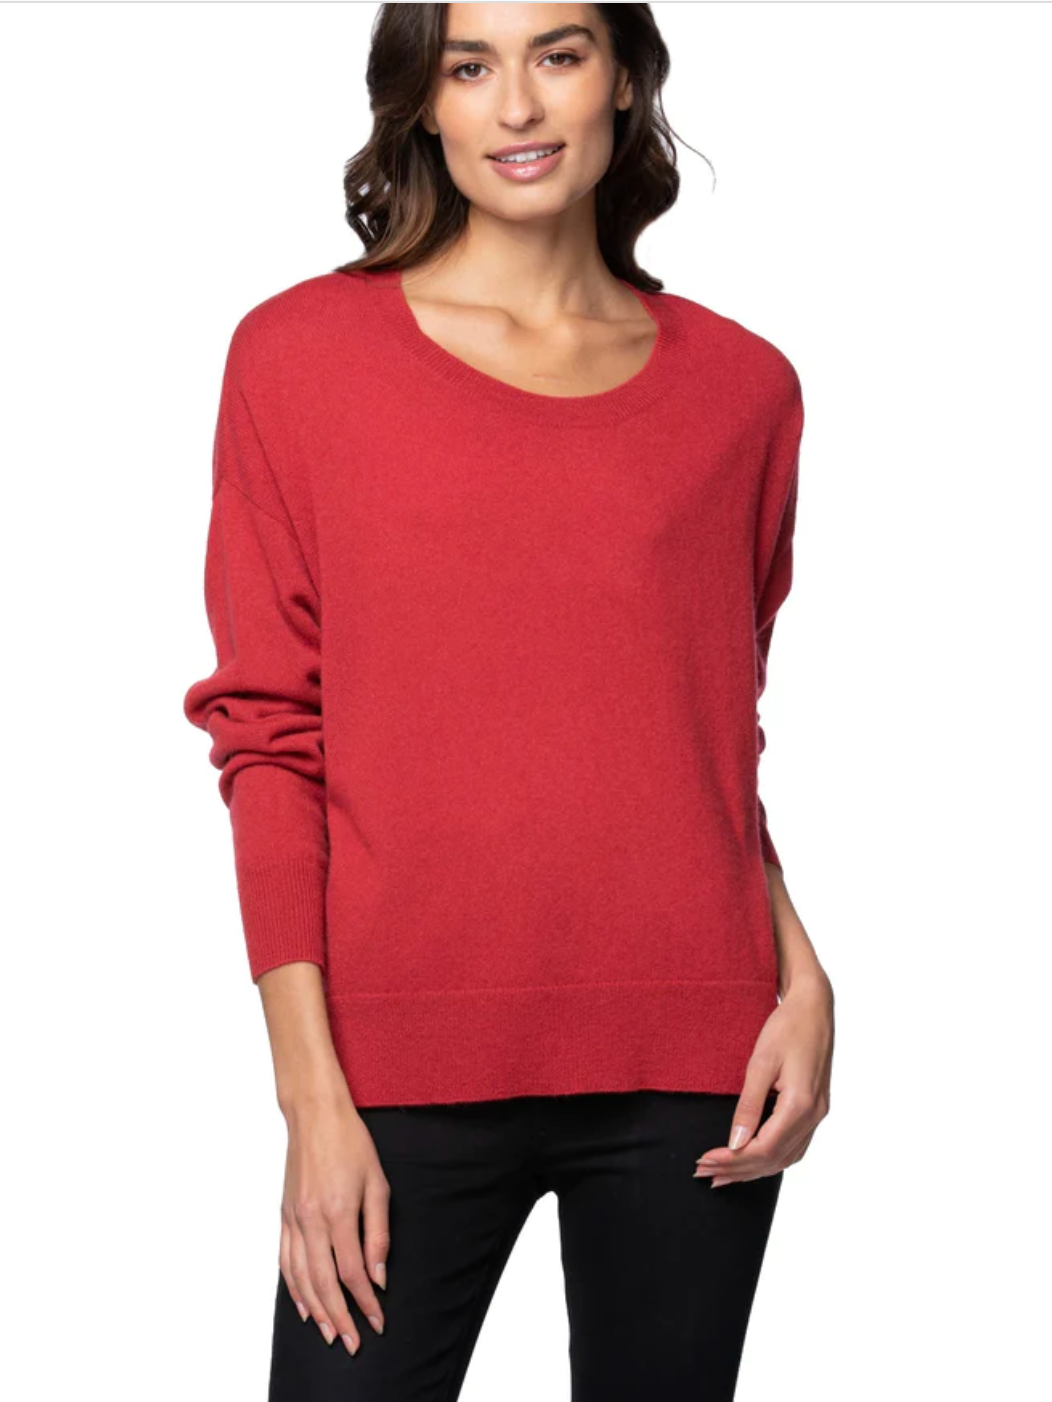 Washable Cashmere Coral Red Sweater